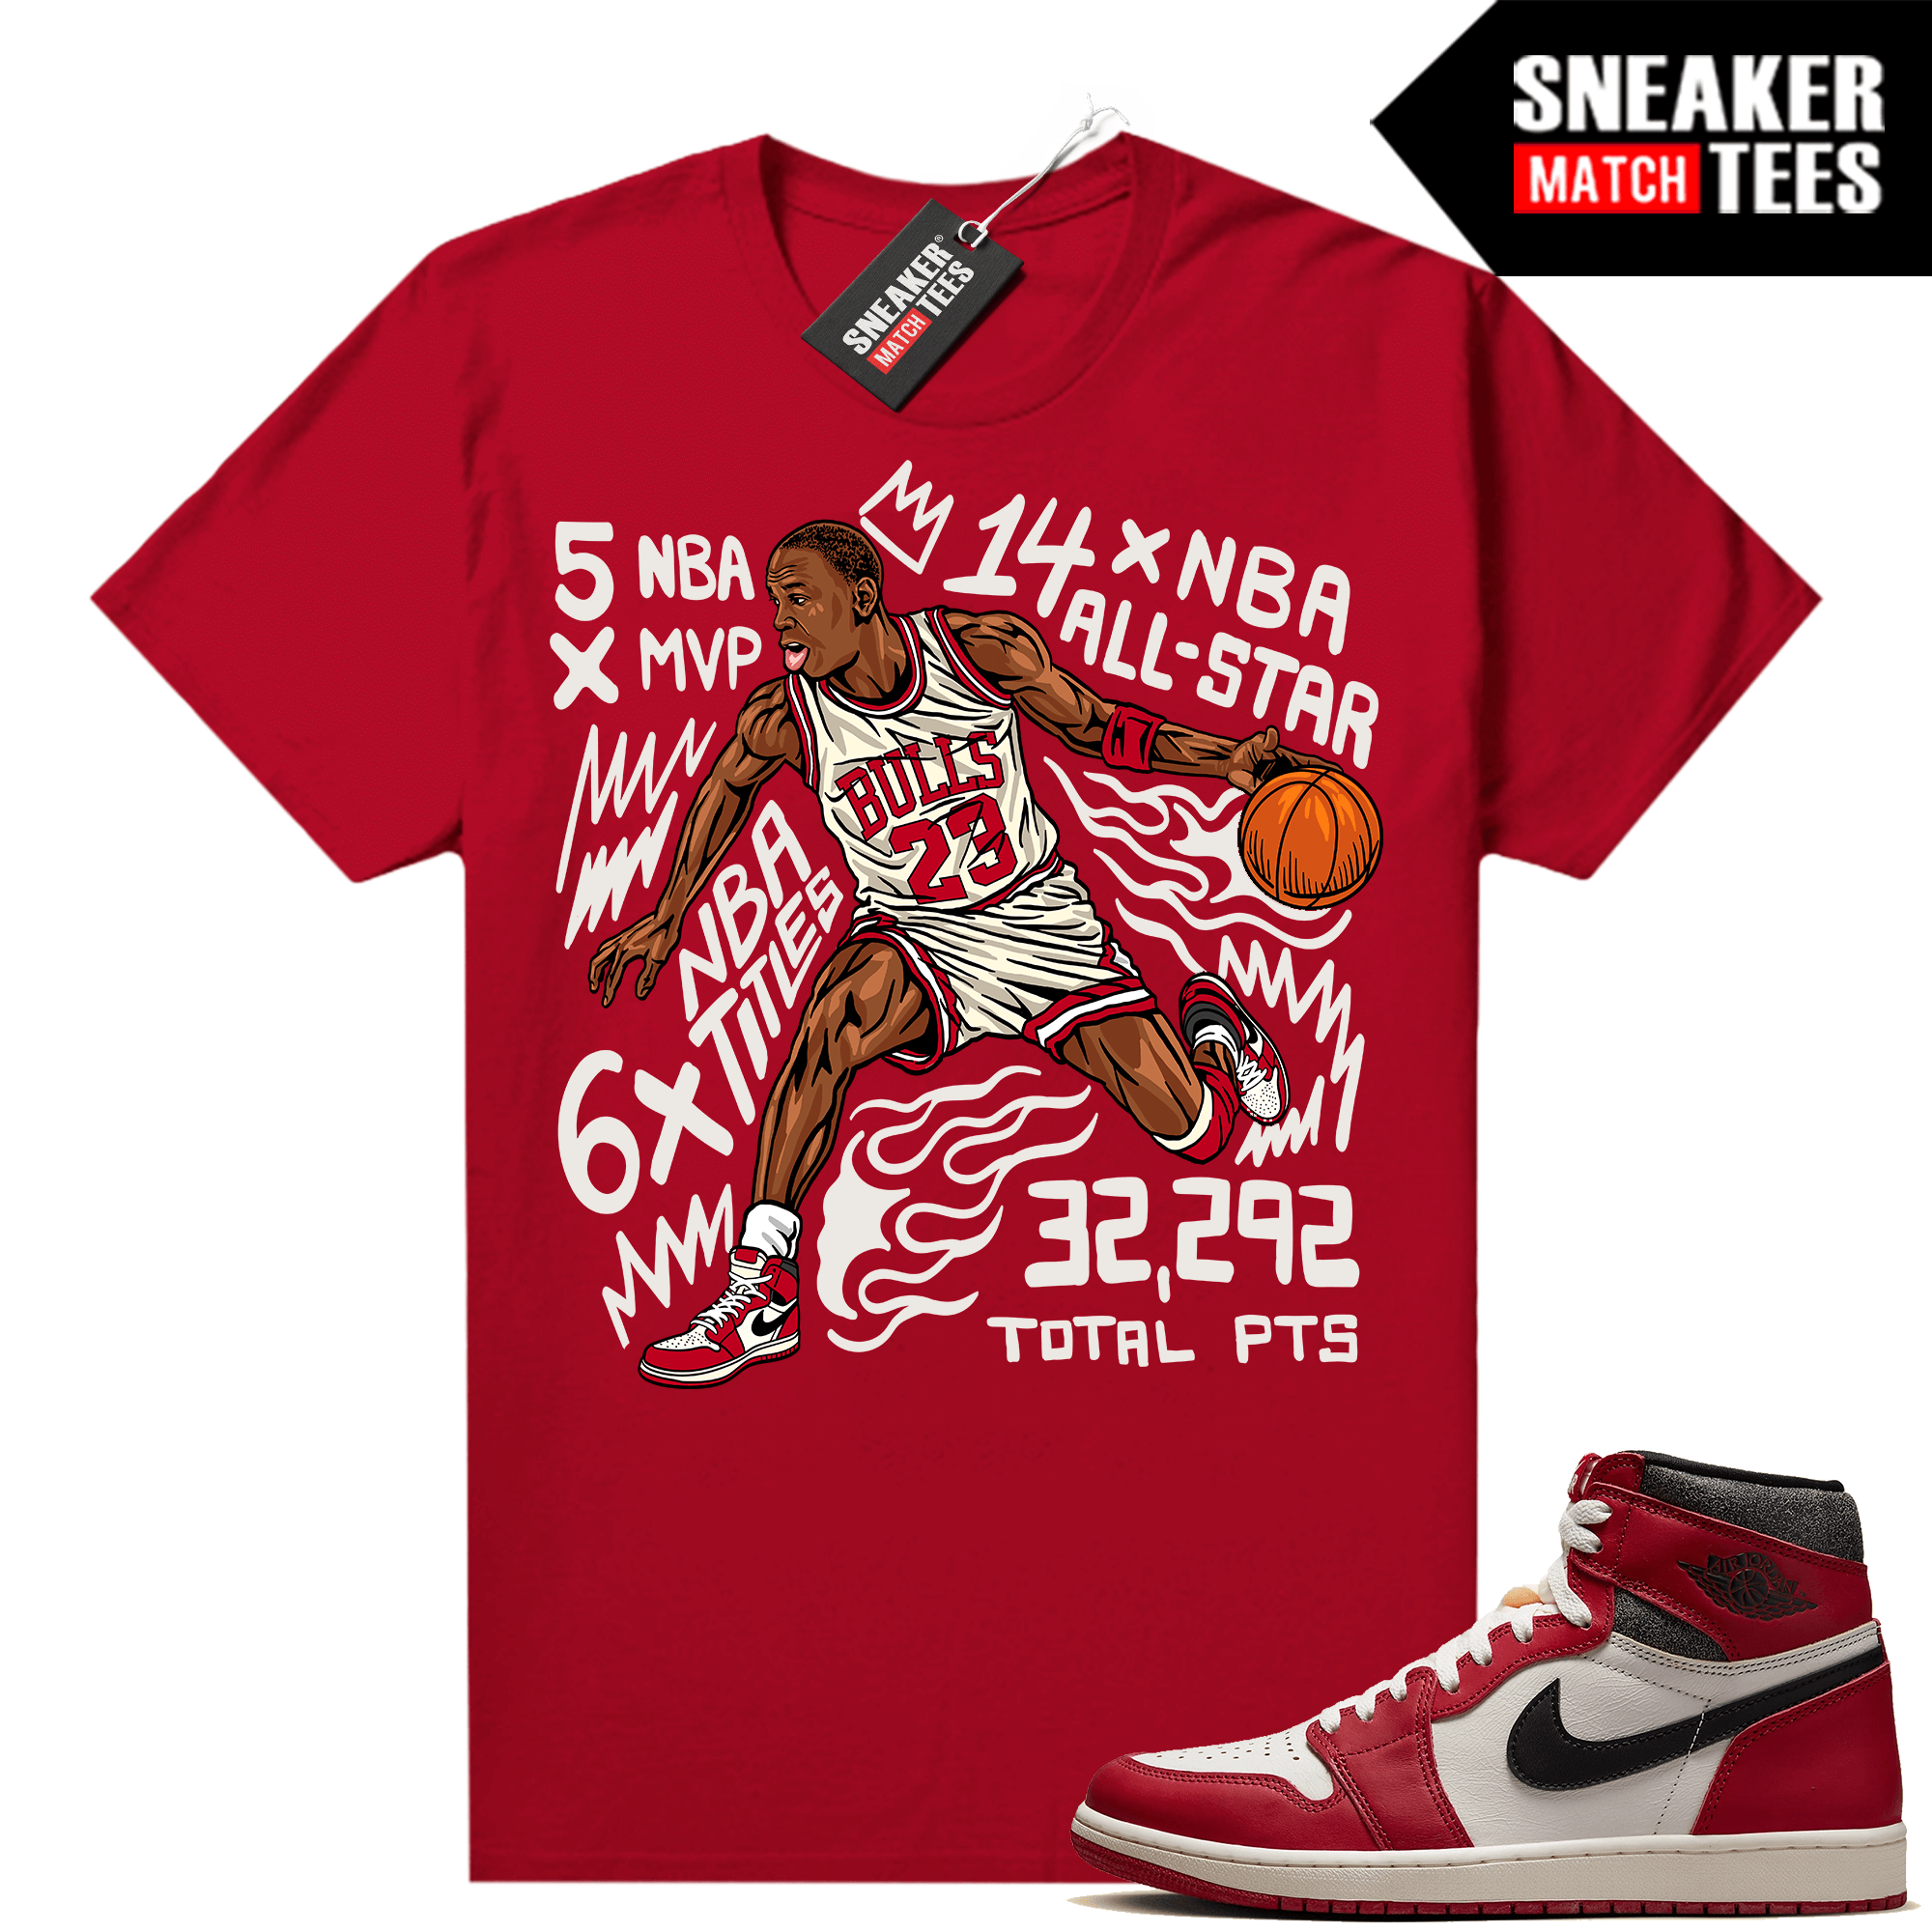 Chicago 1s Lost and Found Runtrendy Sneaker Match Shirt Red MJ Fast Break